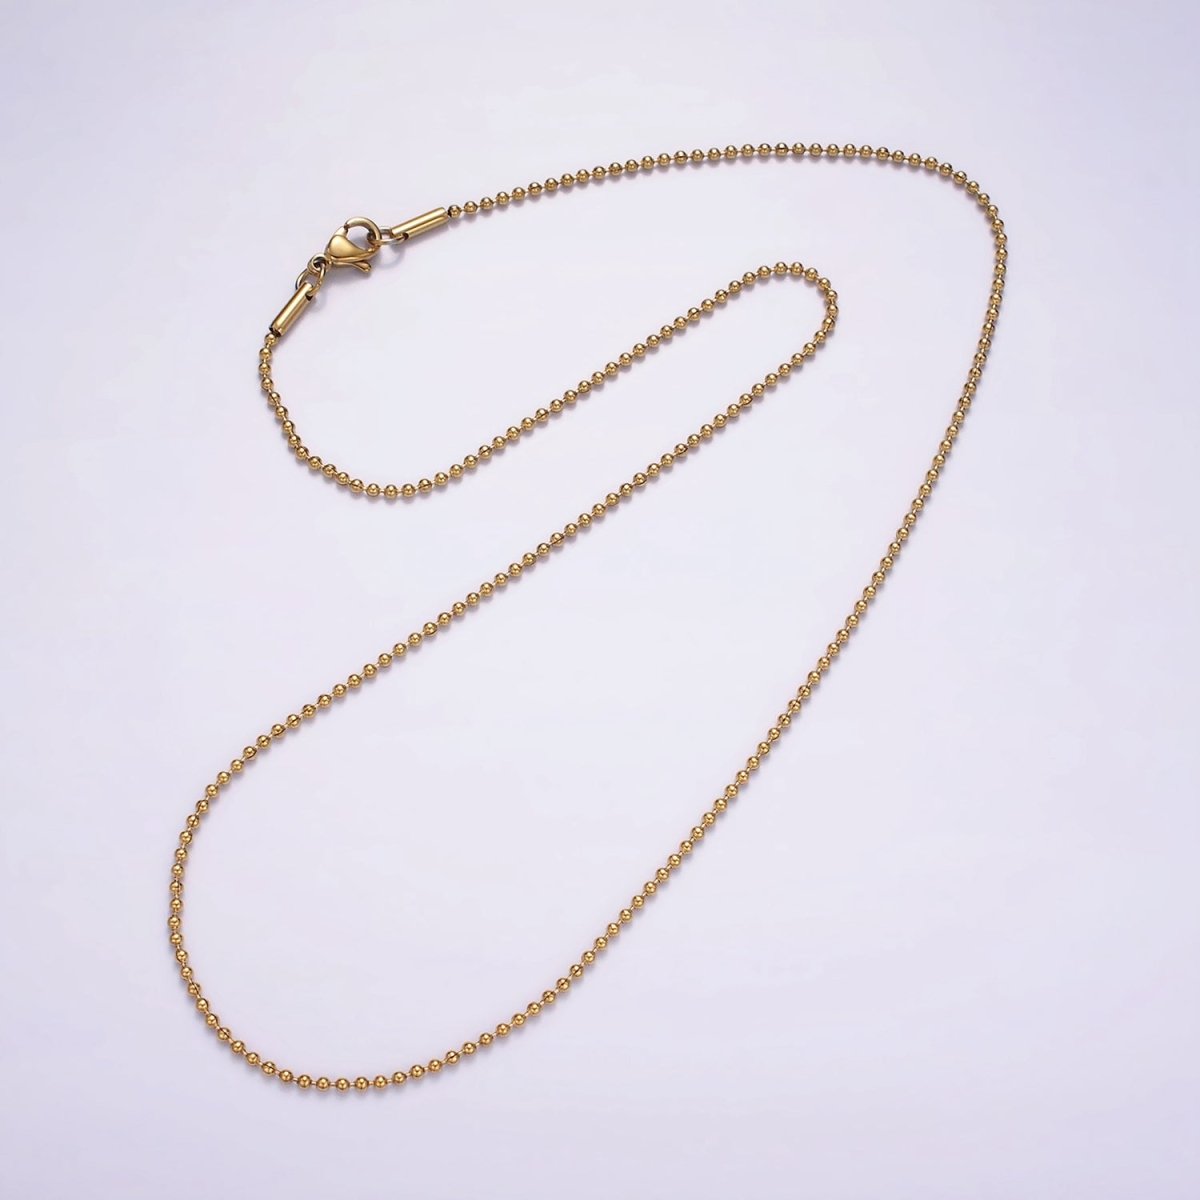 Stainless Steel 1.5mm Bead Ball Chain 18 Inch Necklace | WA-2368 - DLUXCA